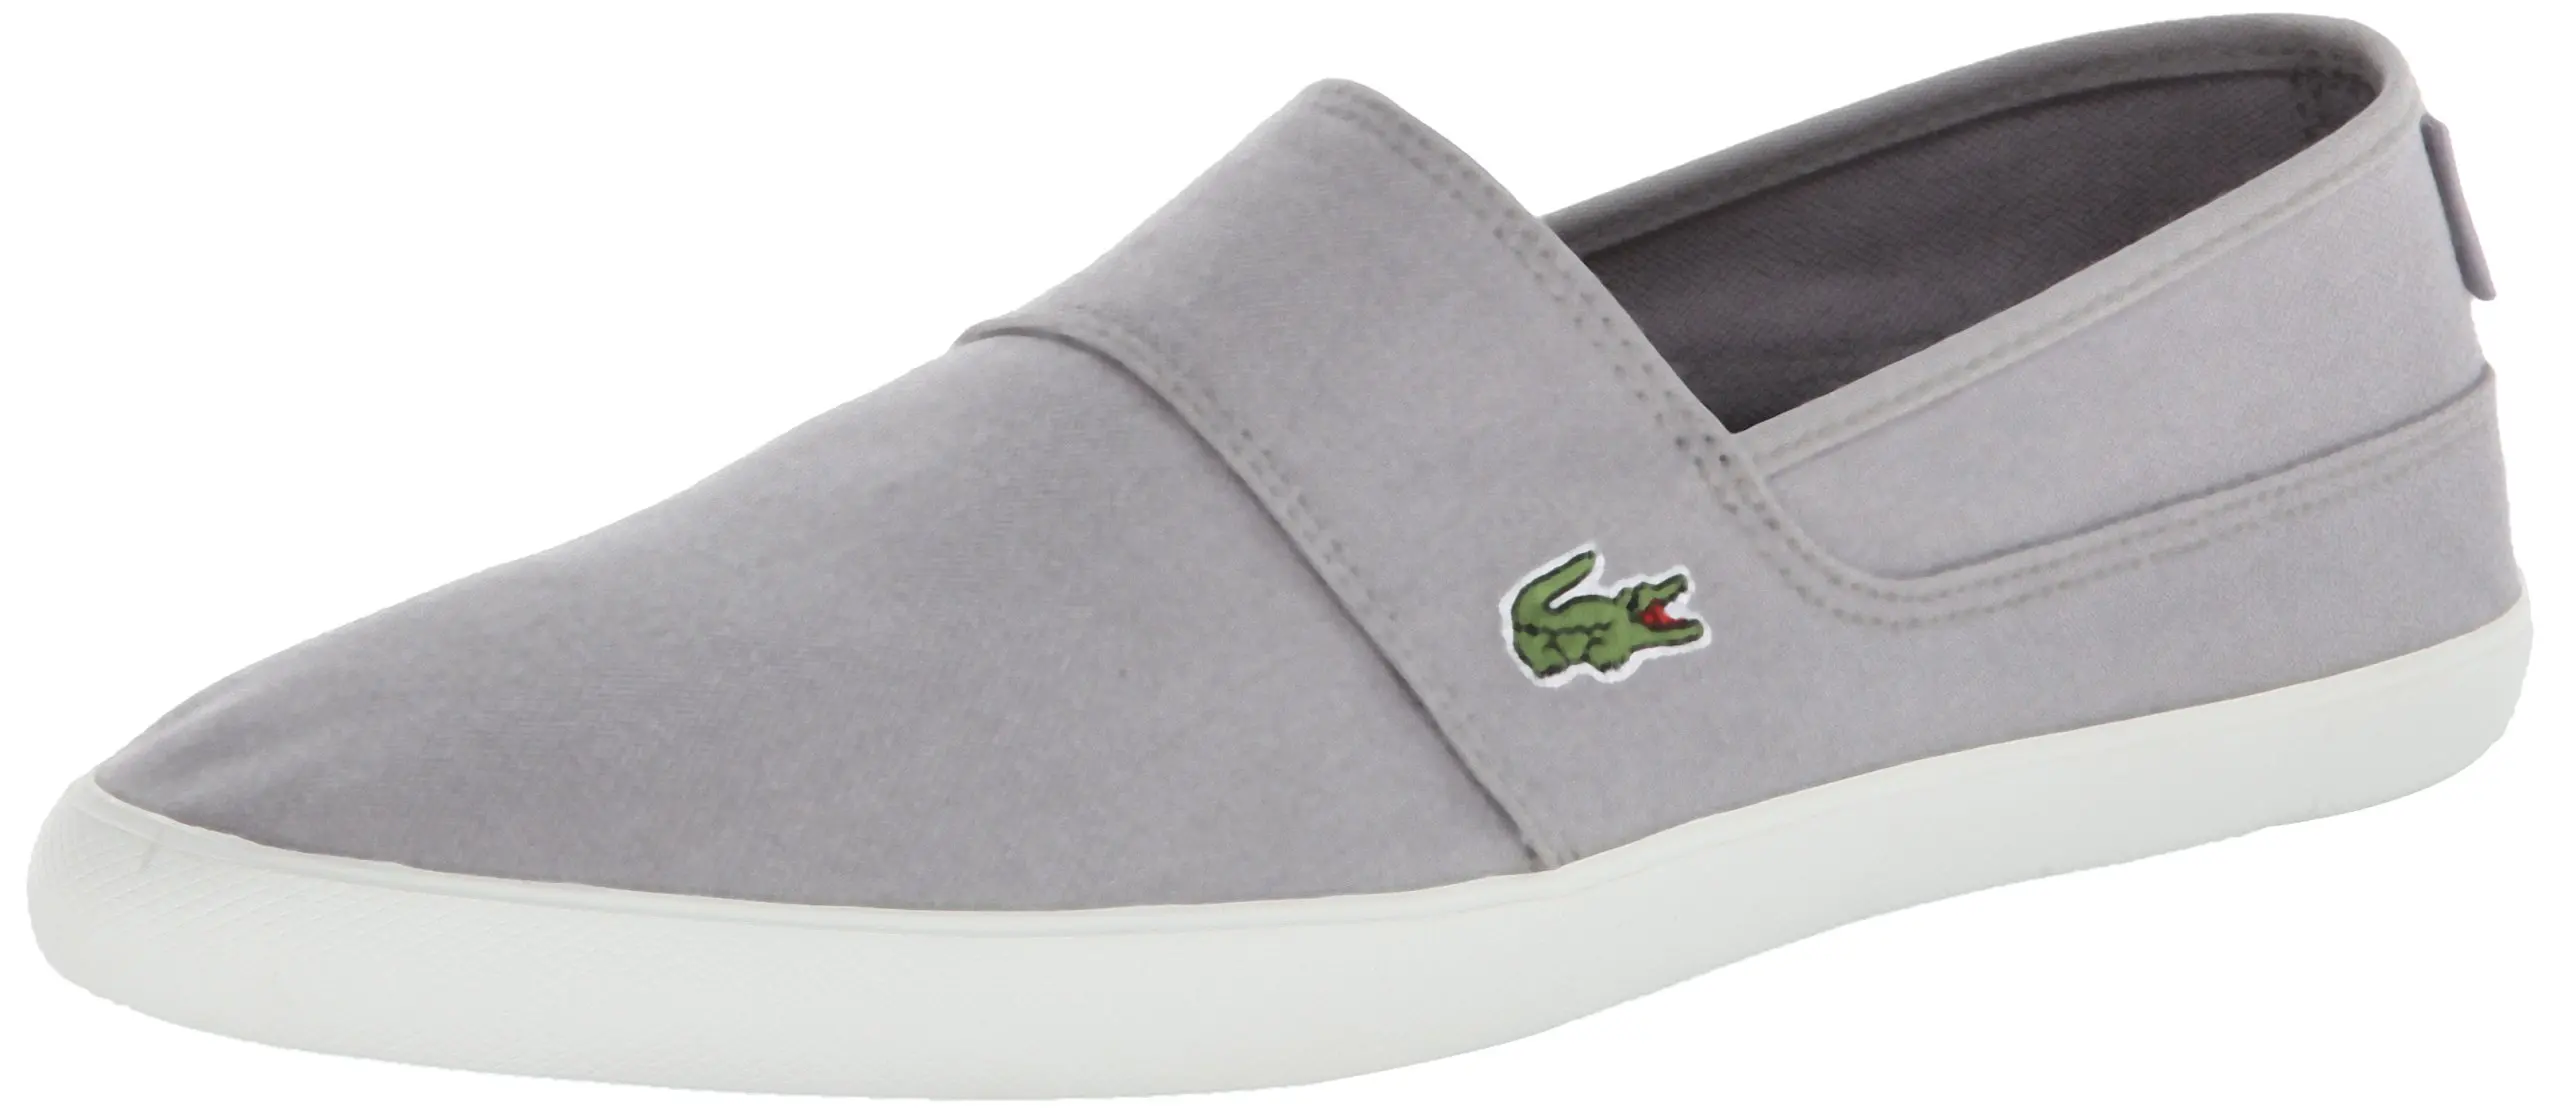 Lacoste Mens Marice LCR Canvas Loafer 